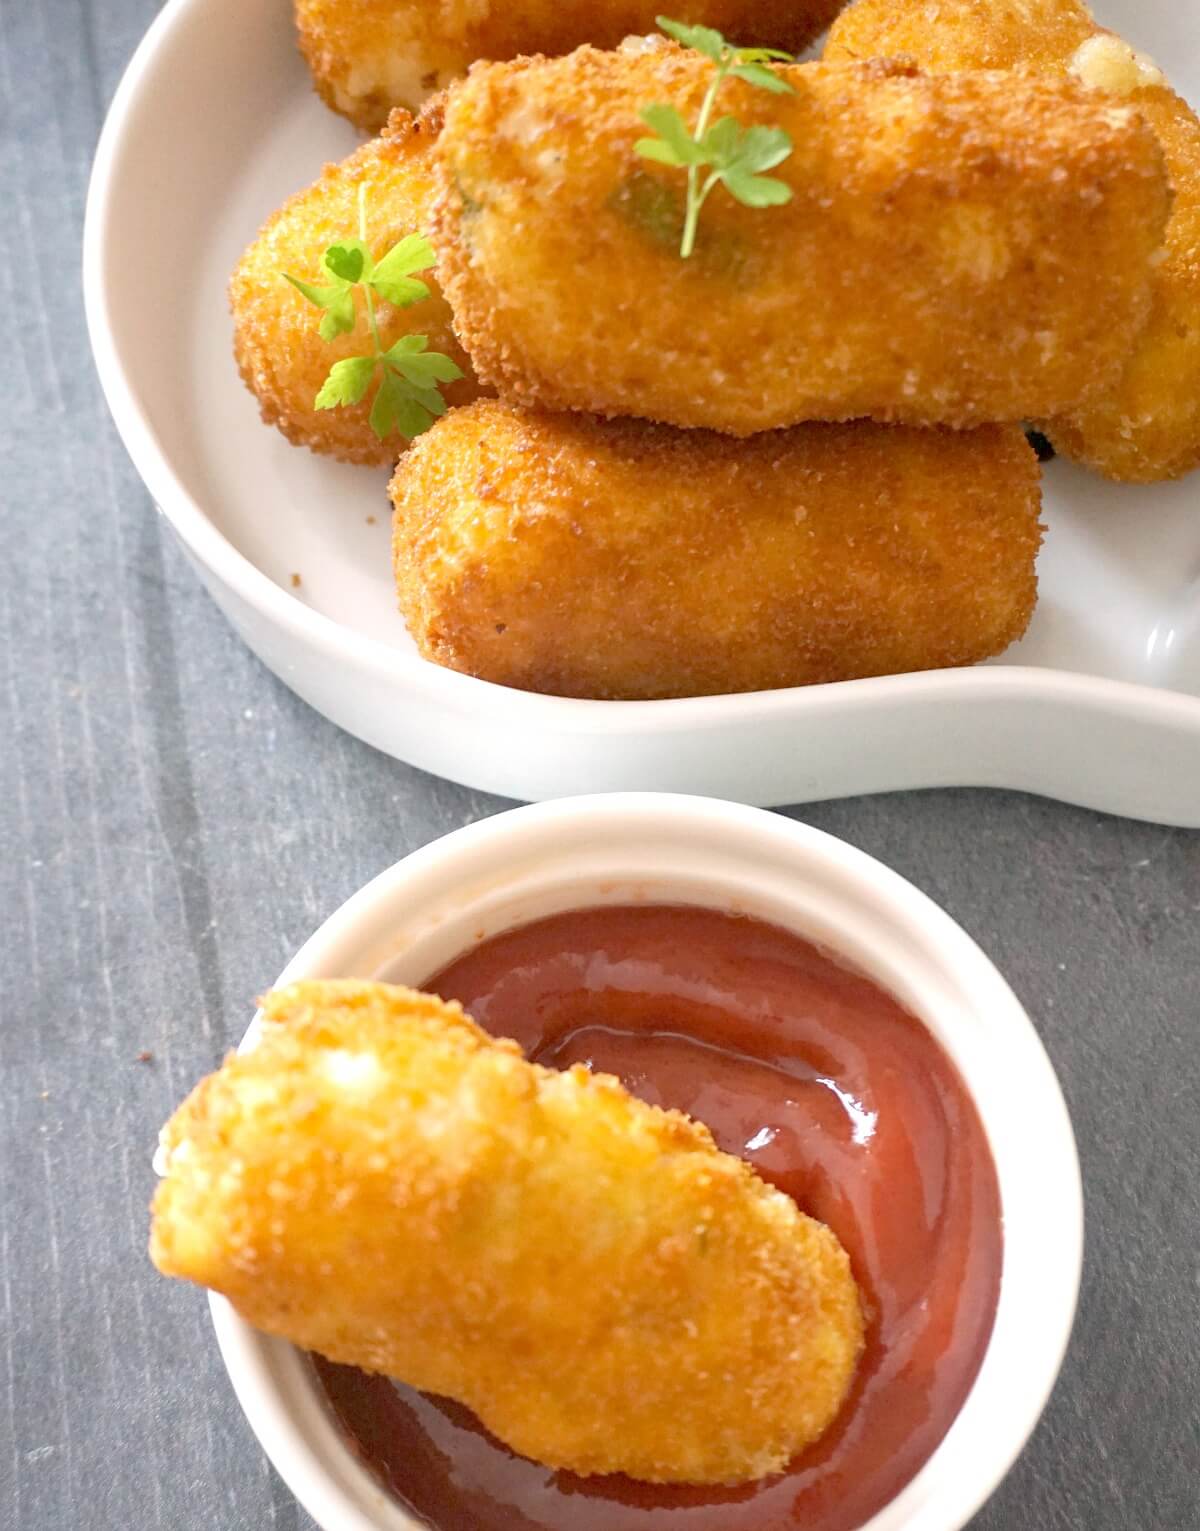 a small bowl with ketchup and a croquette, and another bowl with more croquettes